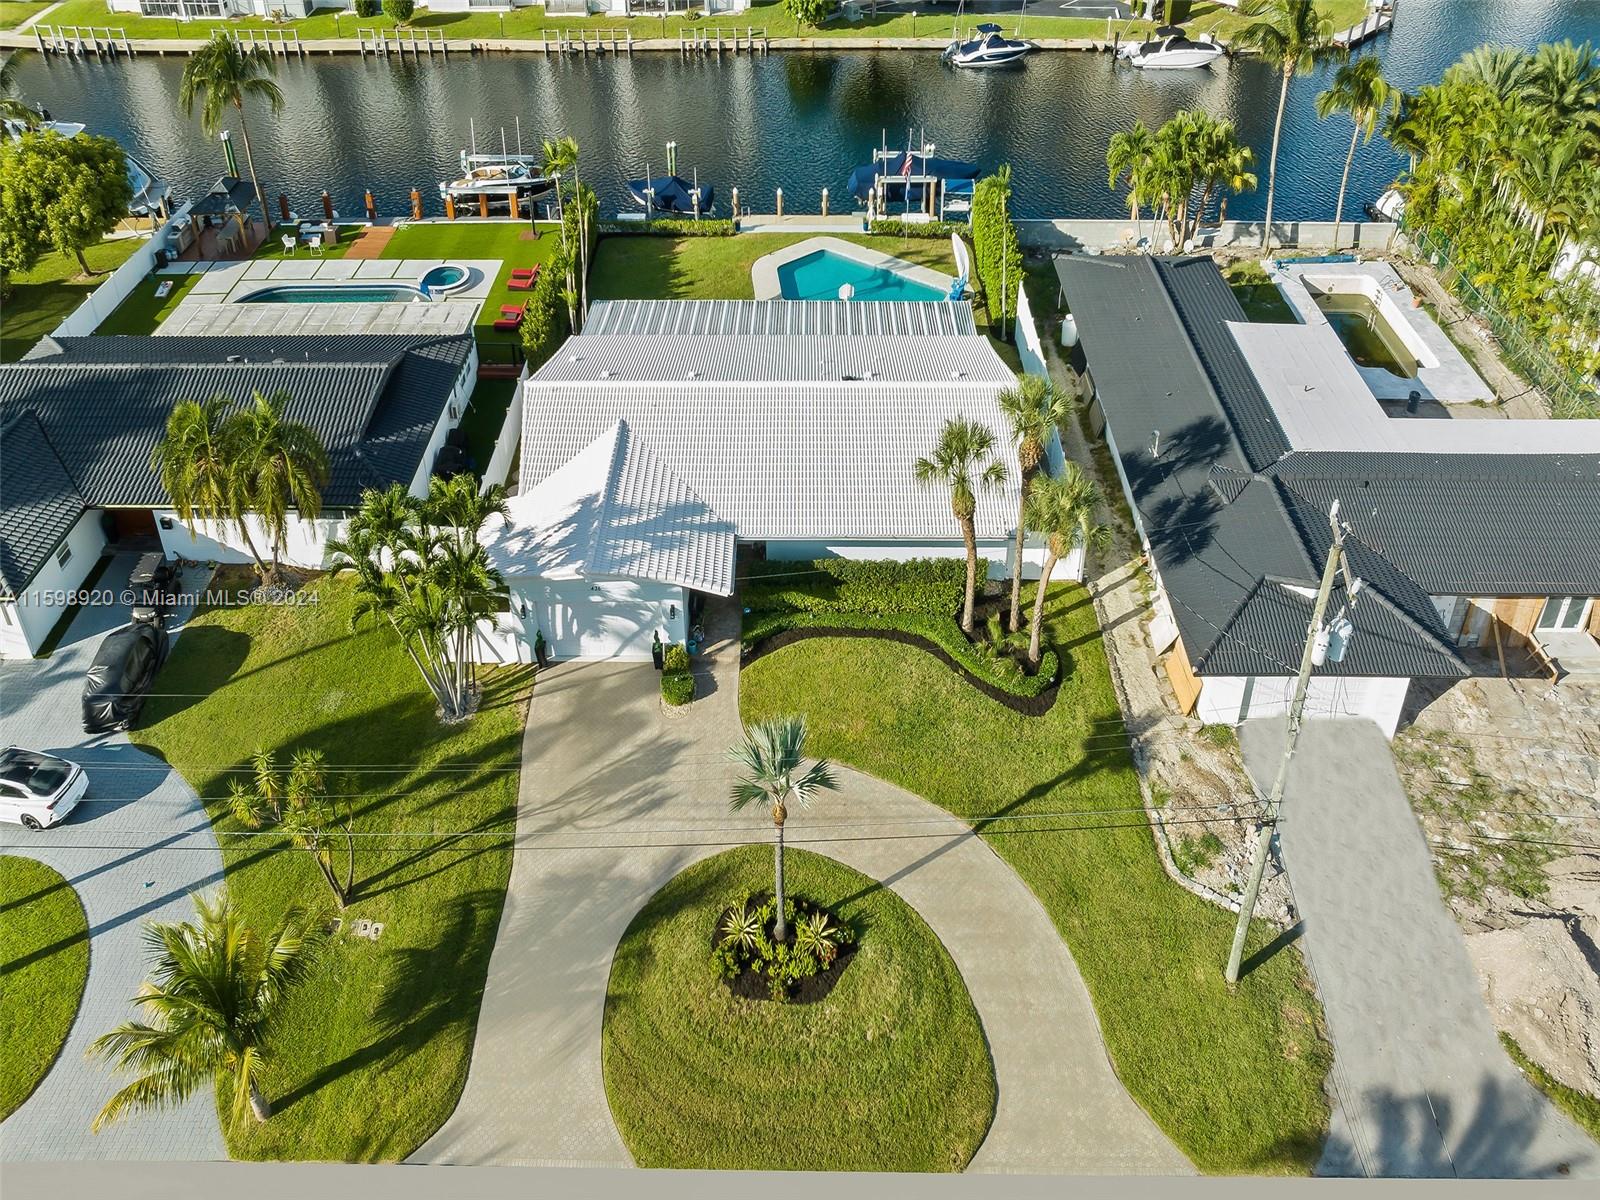 LAND VALUE!! Rent existing home while you design & BUILD your dream home on this oversize lot. Nestled within the prestigious gated community of Golden Isles Estates, this 3 bedroom 2 bath + 2 car garage waterfront home promises a taste of the Florida lifestyle. Centrally located between Miami and Fort Lauderdale, this residence is in close proximity to pristine beaches, world-class restaurants, high-end shops, and entertainment. The property sits on an oversized lot spanning 12,750 sqft, with 85 ft of deep water frontage, no fixed bridges and quick access (~ 25 min) to the open ocean. This property has been meticulously updated inside and outside for avid yachters. The newly renovated dock rests on a batter pile sea wall, features 2 boat lifts, composite decking, shore power and water.